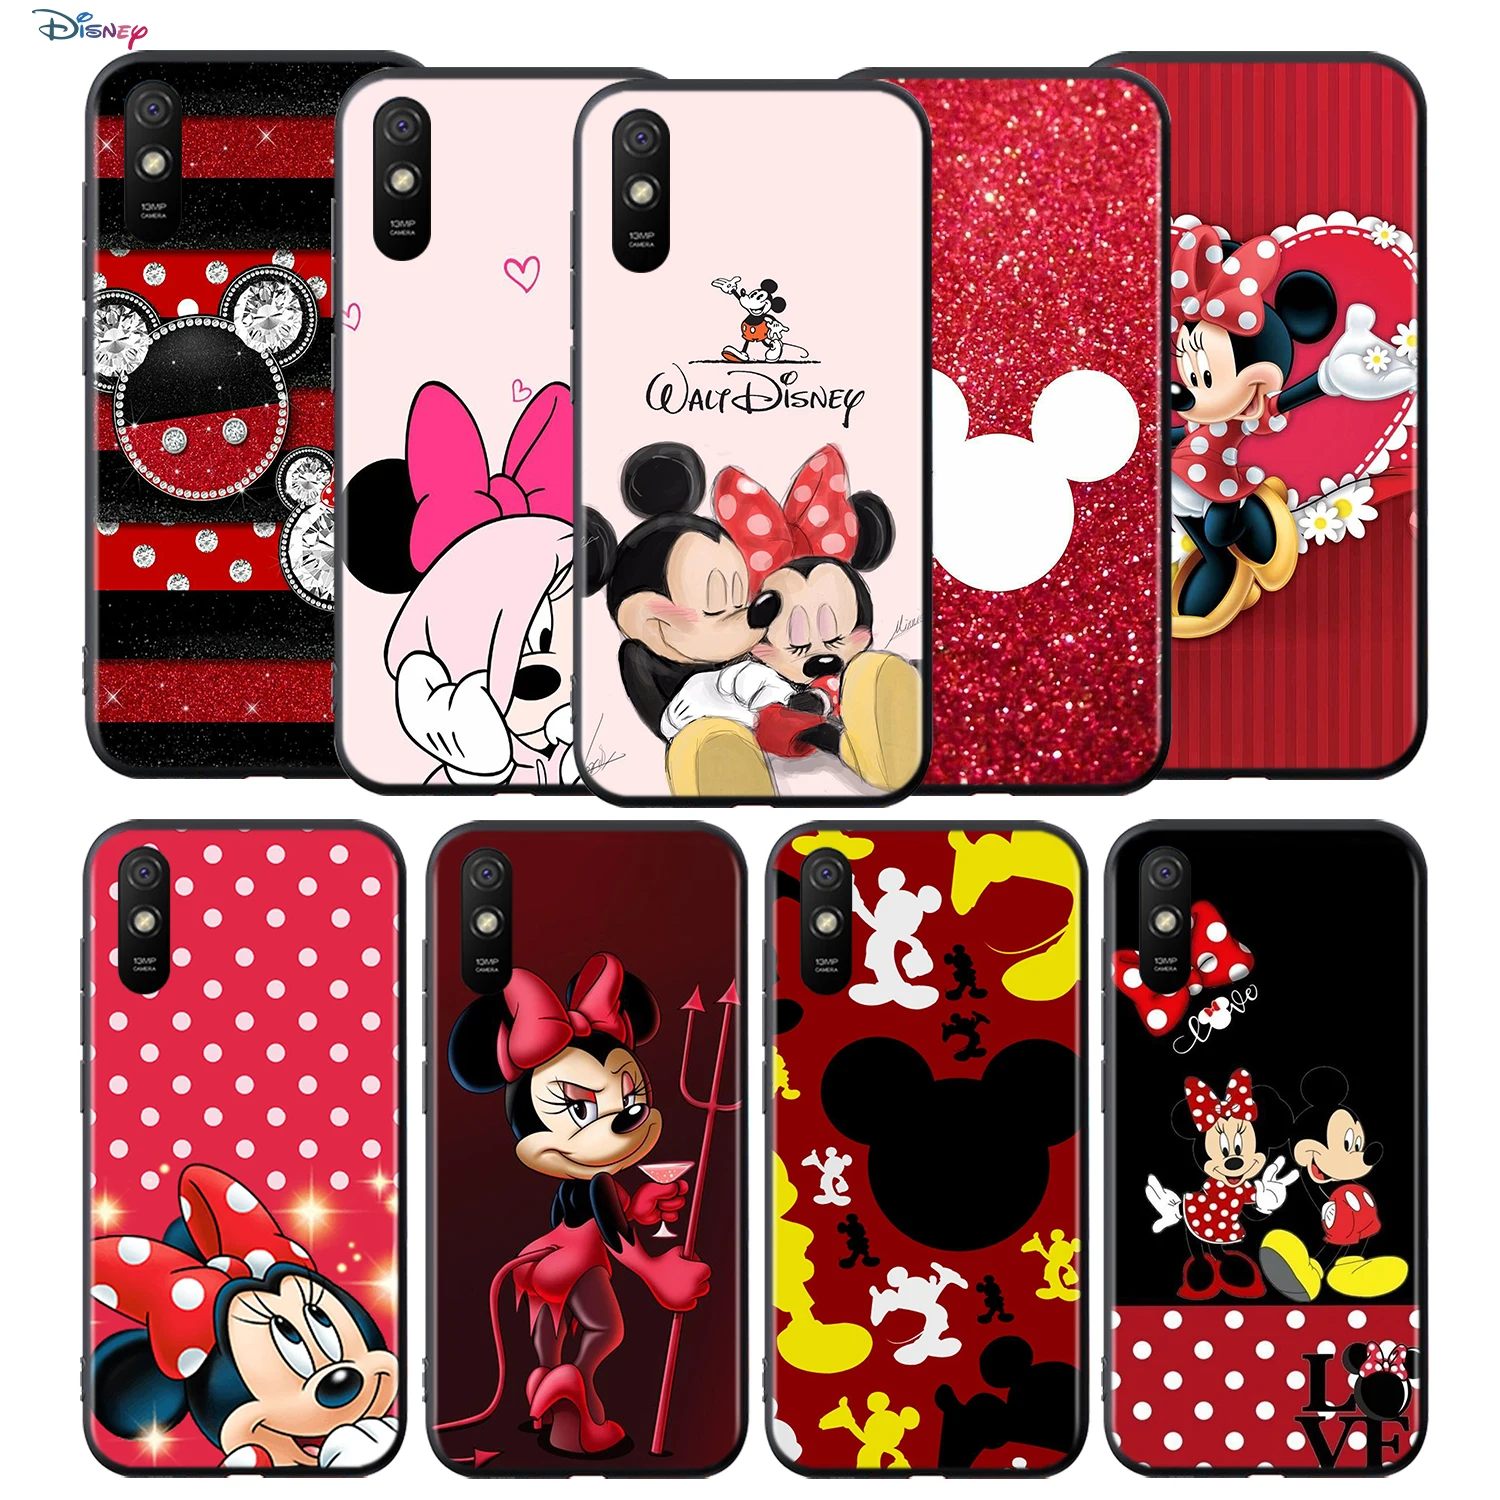 Silicone Cover Red Mickey Minnie For Xiaomi Redmi 9T 9 9C 9A 9AT 9i 8 8A 7 6 Pro 7A 6A 5 5A 4X Plus Phone Case